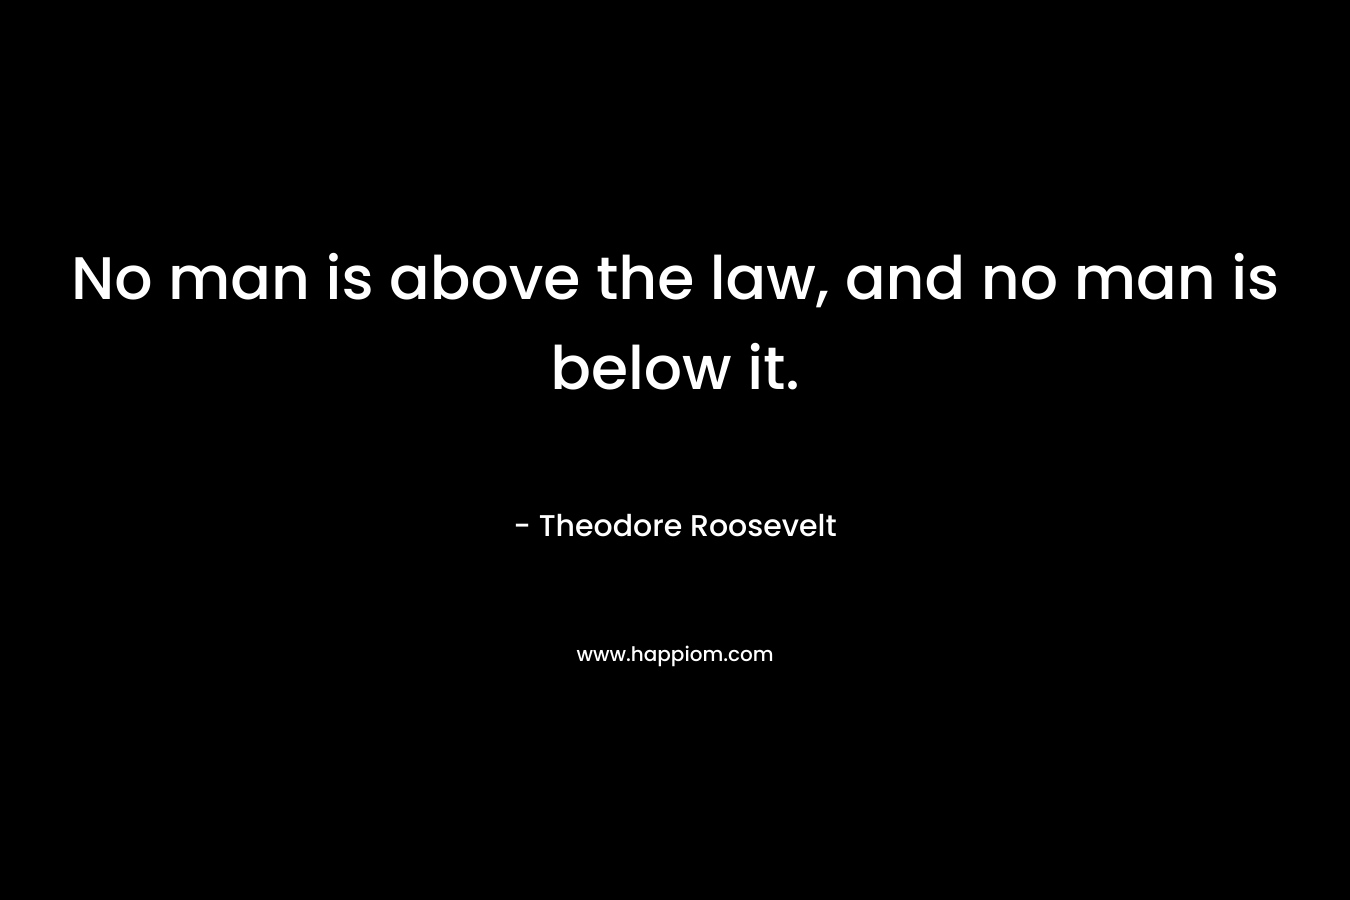 No man is above the law, and no man is below it. – Theodore Roosevelt